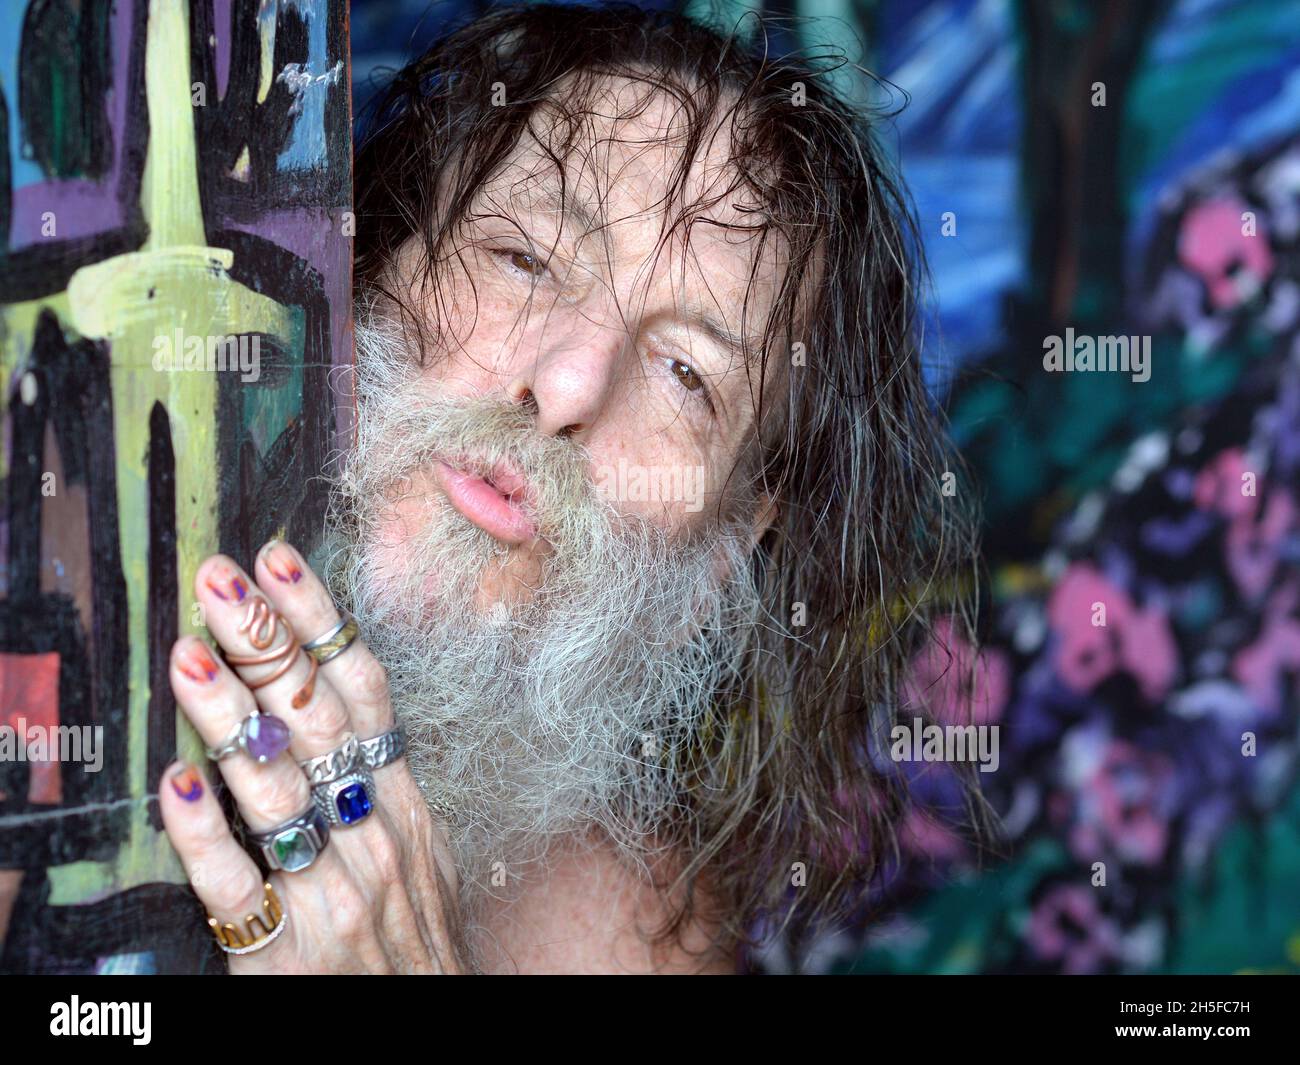 Eccentric old Caucasian man with grey beard, long unkempt hair and multi-ringed hand peeks around a painted door and puckers his lips. Stock Photo